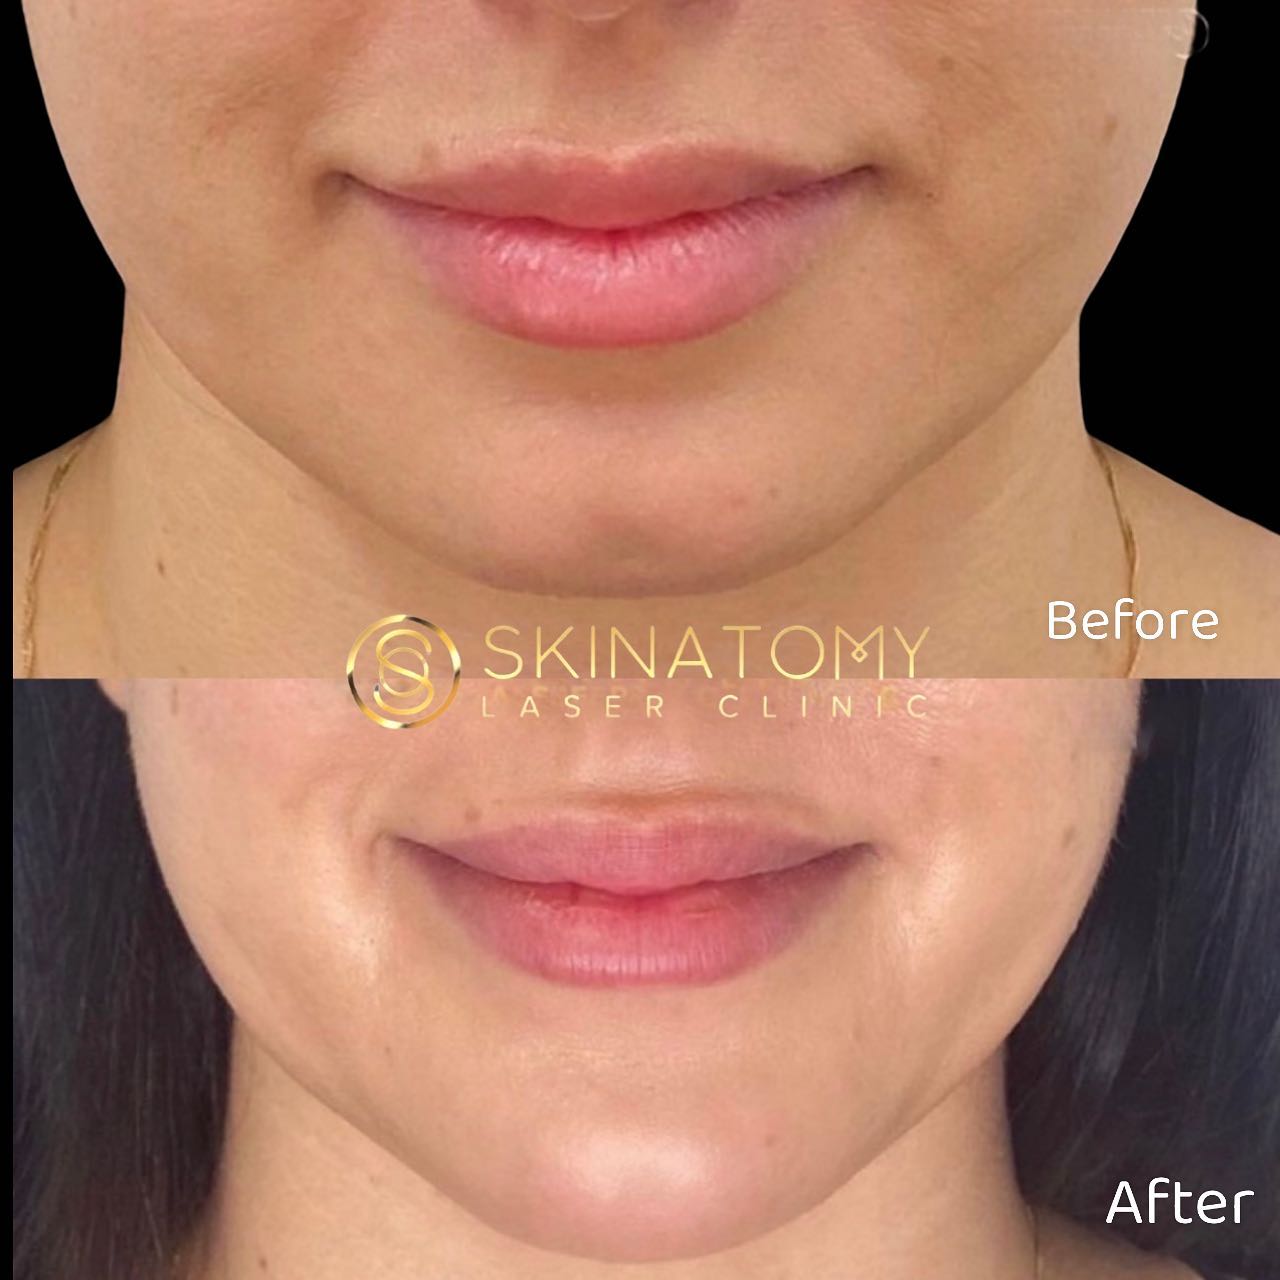 Skinatomy Laser Clinic | 4092 Confederation Pkwy, Mississauga, ON L5B 0G4, Canada | Phone: (905) 949-9198